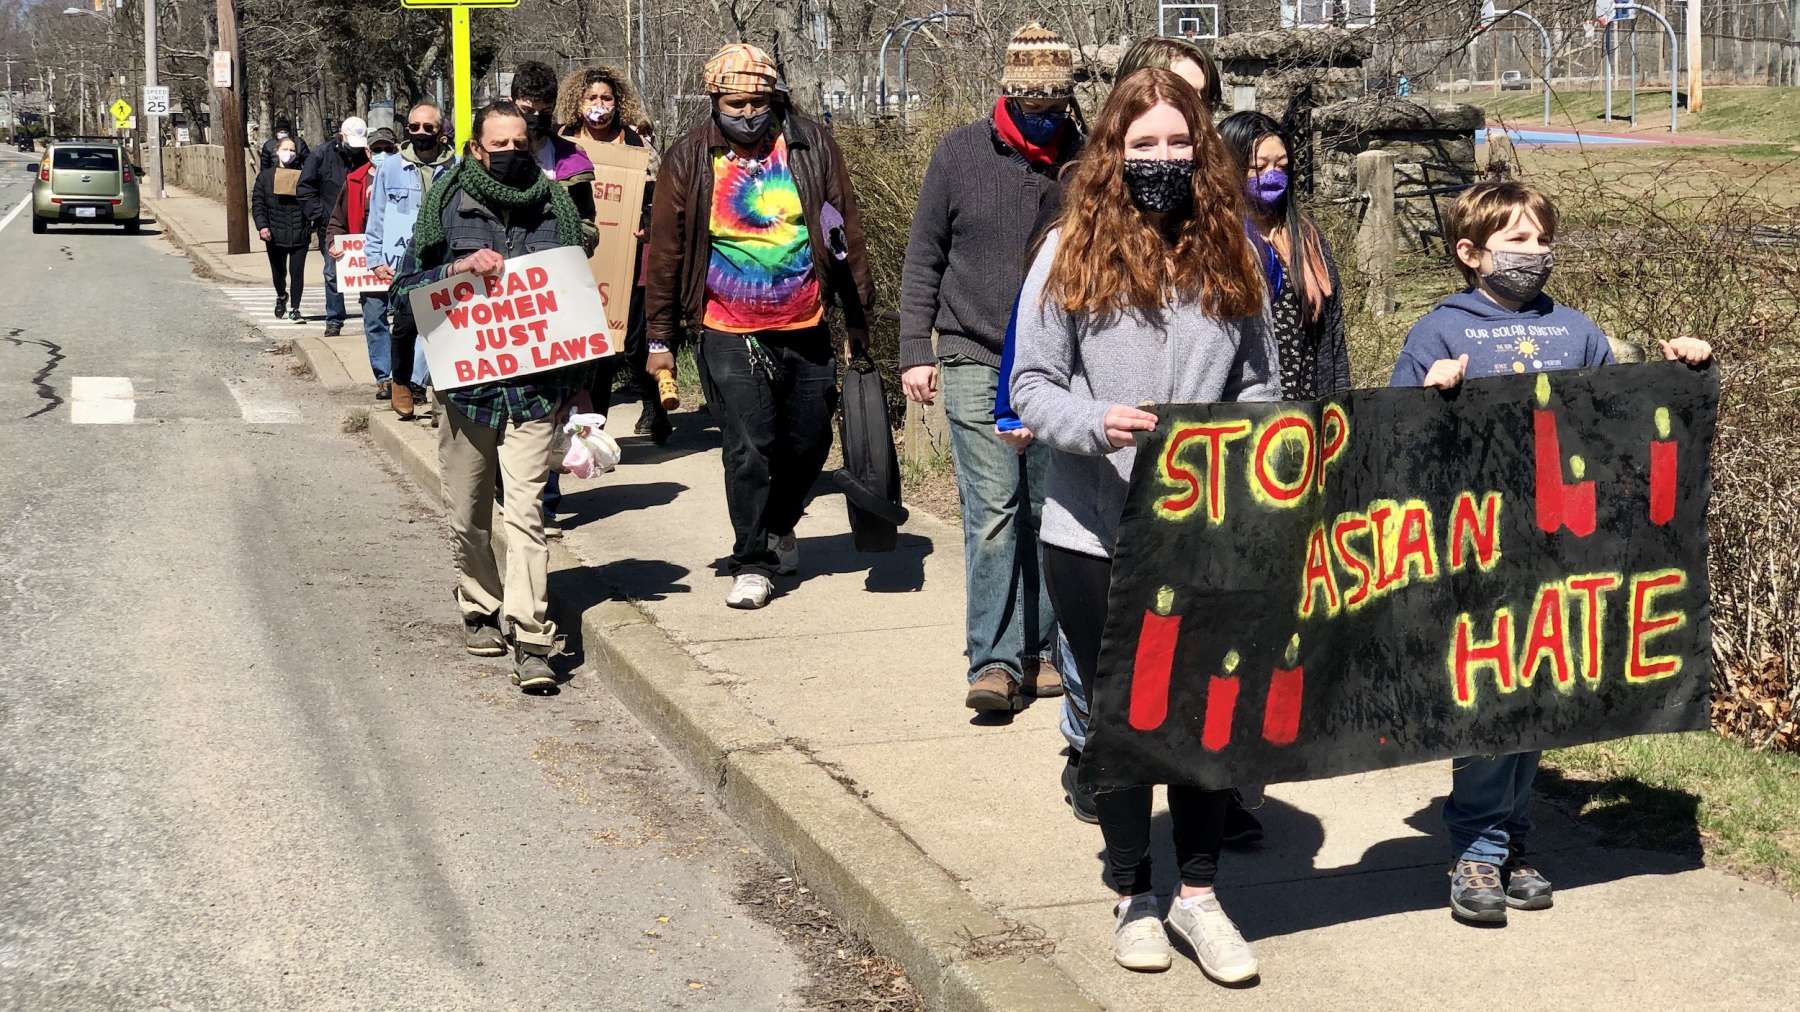 Rhode Island News: Youth organize a Stop Asian Hate March in South Kingstown